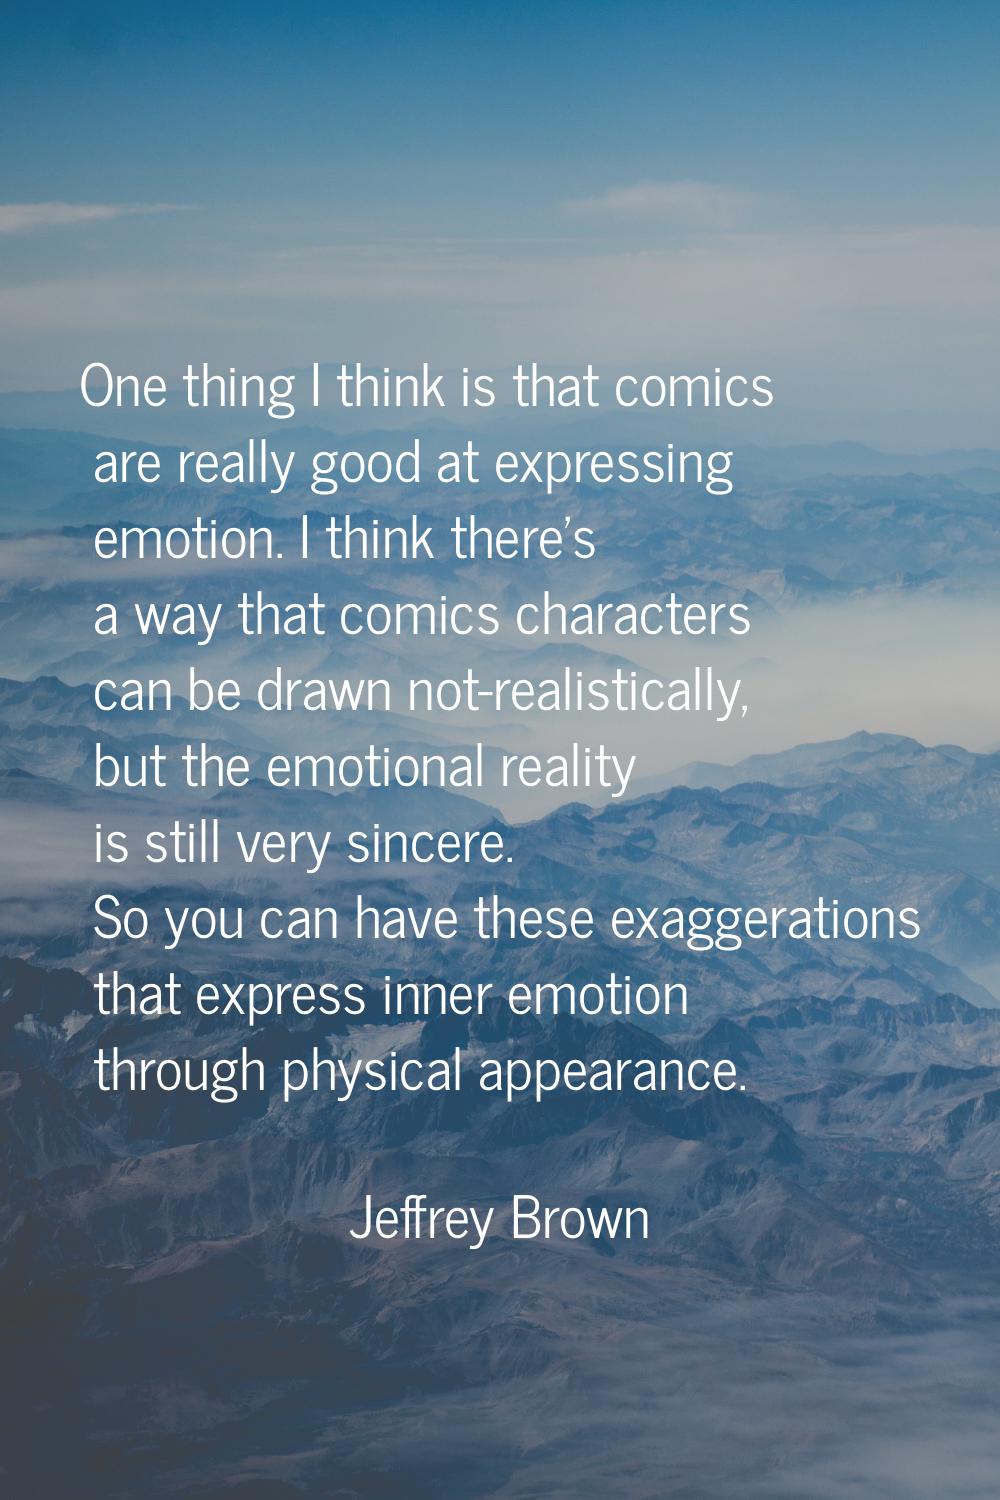 One thing I think is that comics are really good at expressing emotion. I think there's a way that 